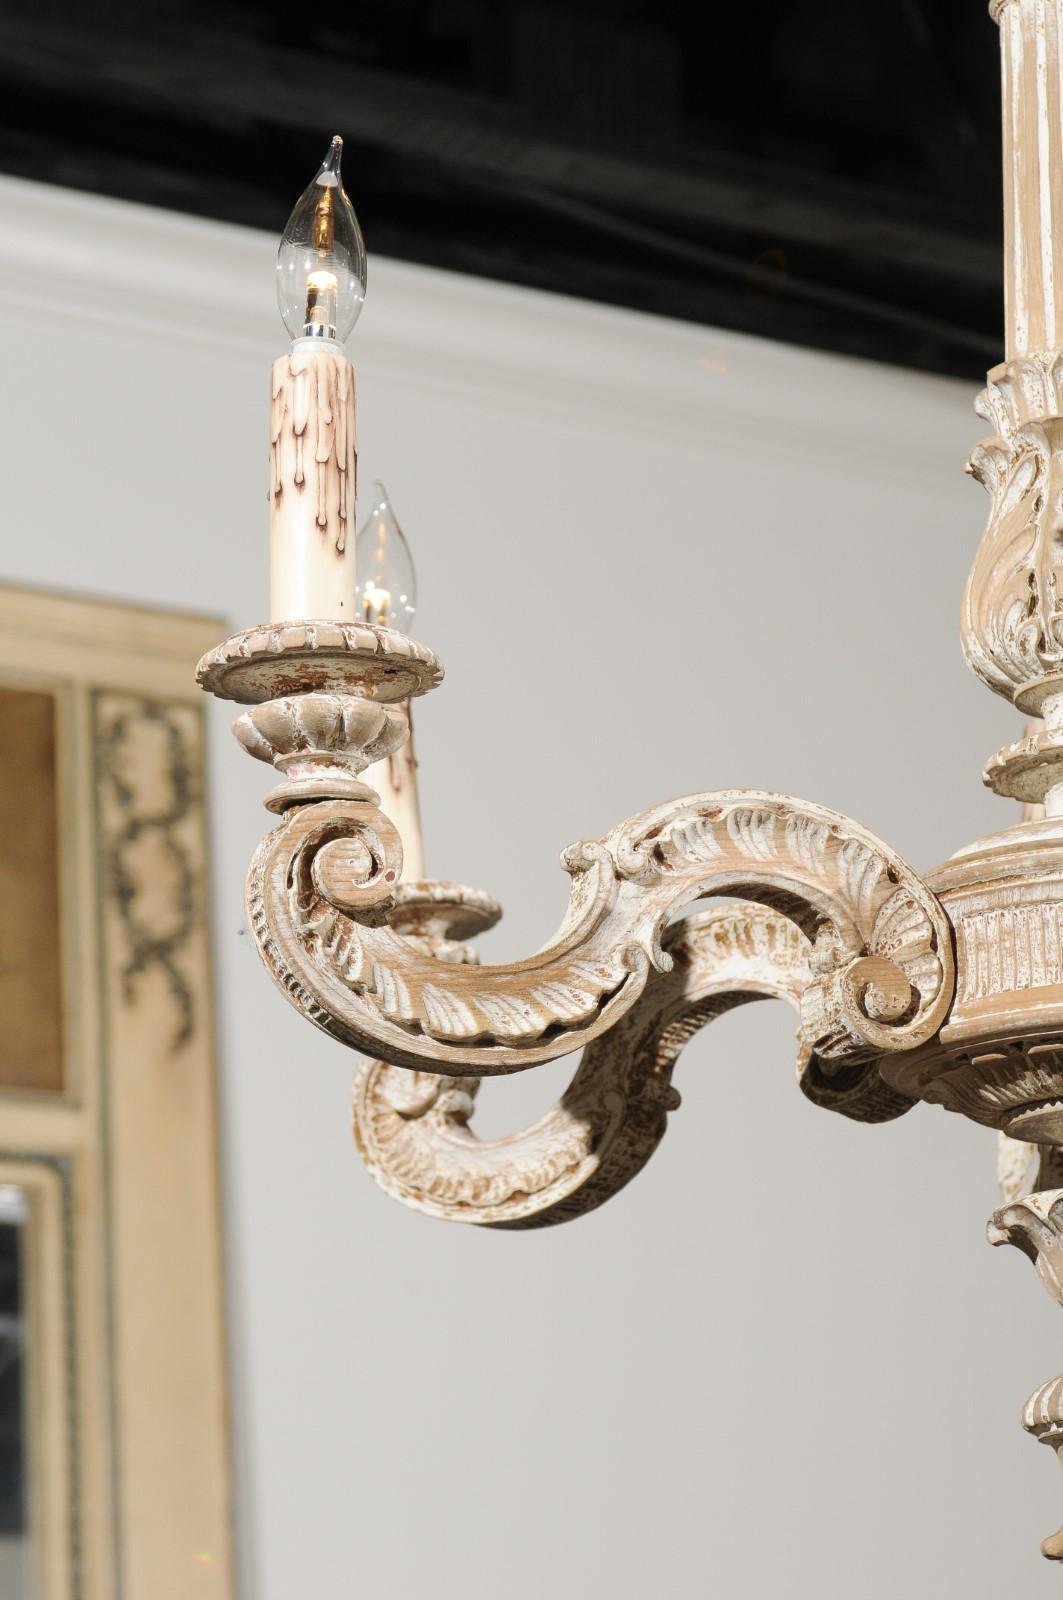 A French carved and painted wood six-light chandelier from the turn of the century, with central column and scrolling arms. Born in France during the late 19th-early 20th century, this exquisite chandelier features a central wooden column adorned